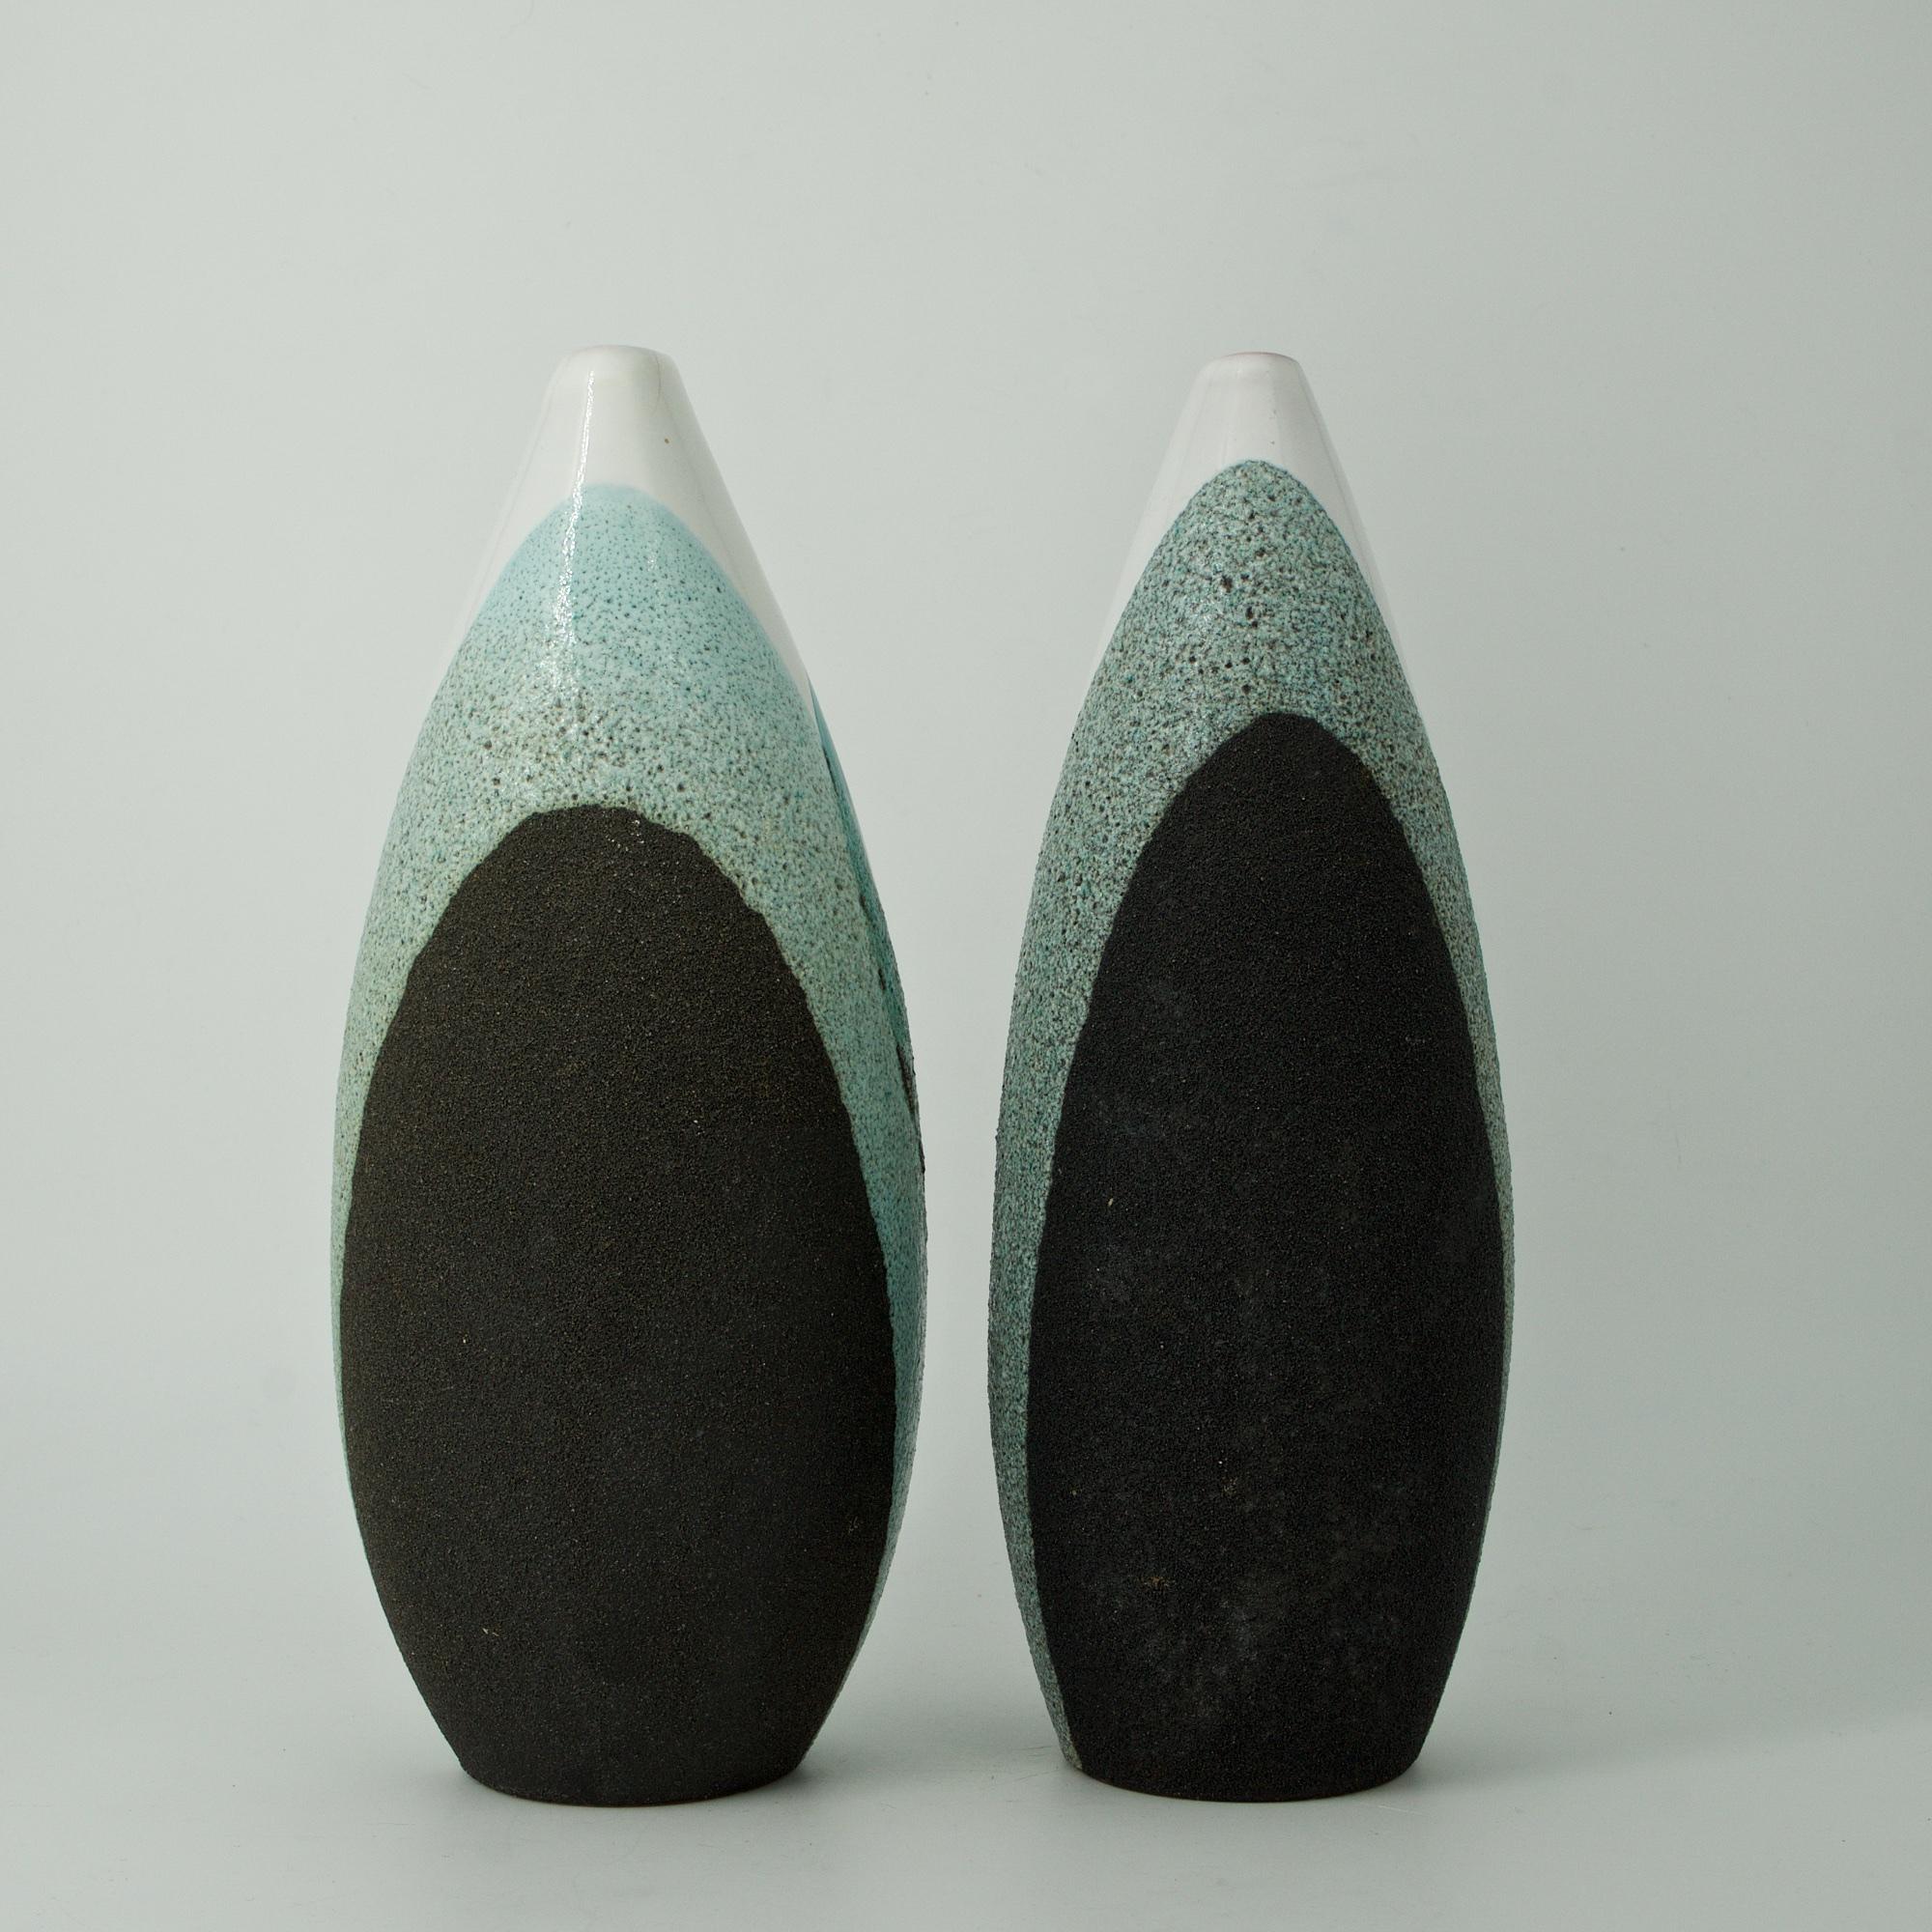 Pair of Bitossi Raymor ceramic vases, one with hariline to tip, and other with roughness to tip.
Measures: Diameter 3.75 x height 9.88 in. 
Measures: Diameter 4.25 x height 9.88 in.